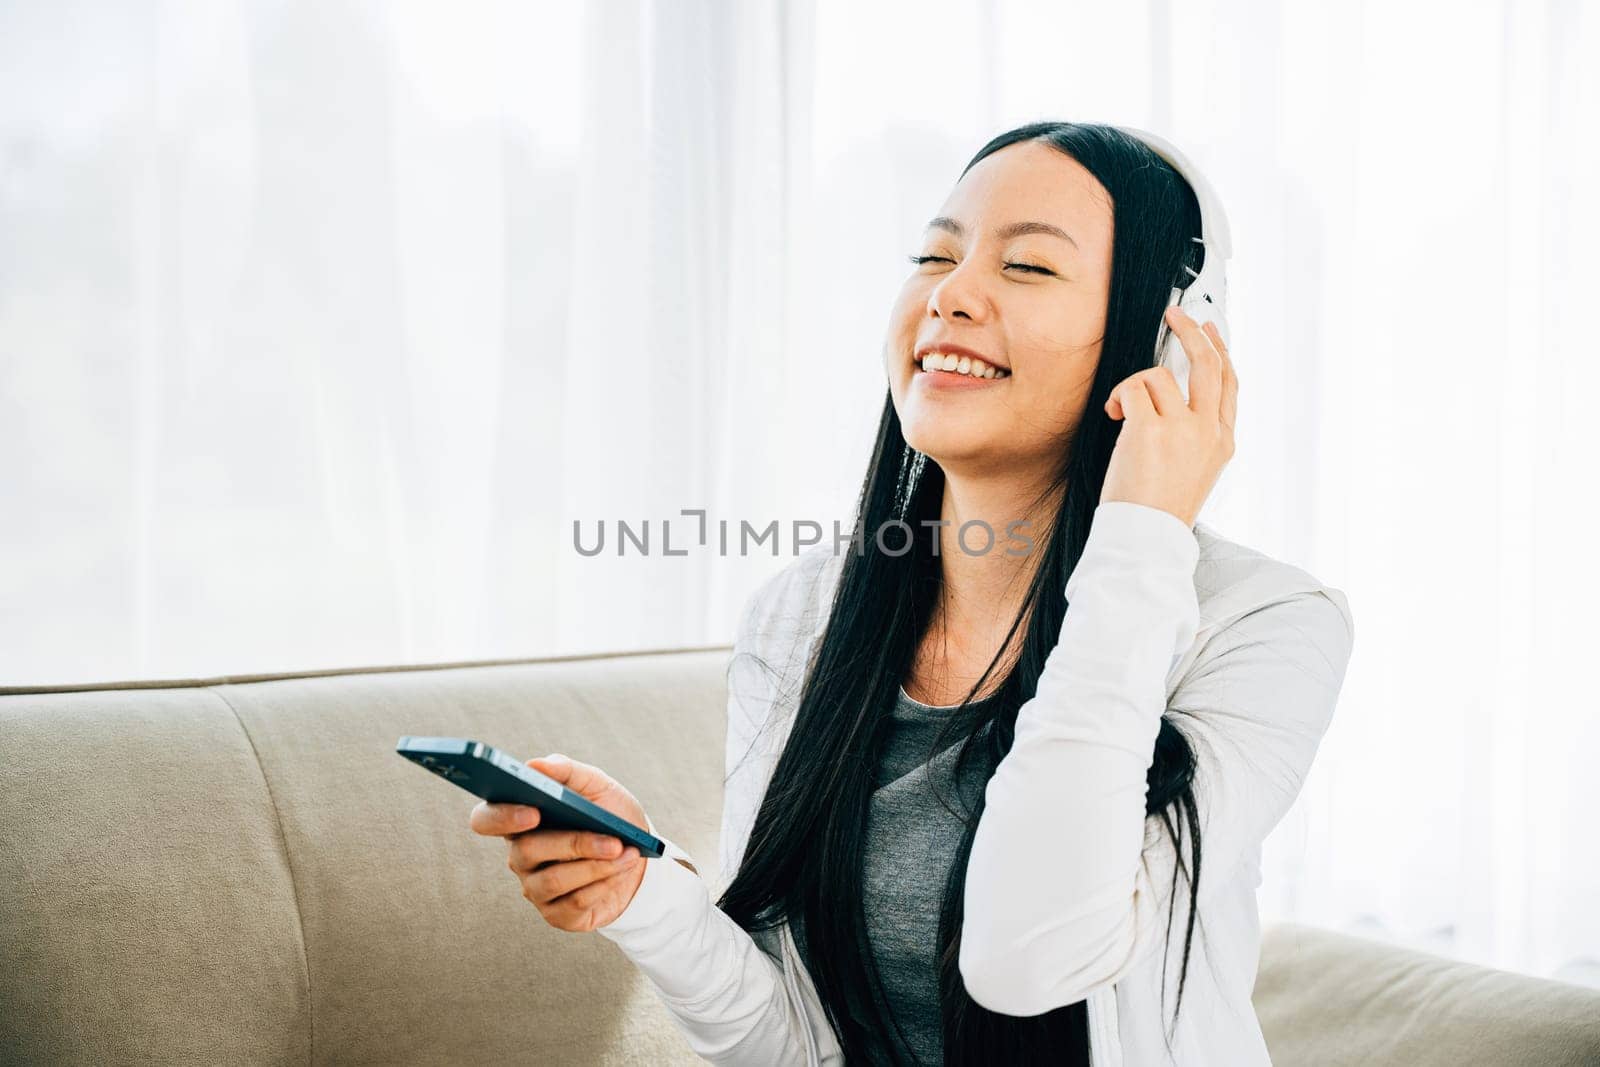 Attractive woman on sofa listens to music uses smartphone with headphones. Engaged in leisure relaxation and entertainment at home. Modern technology concept.